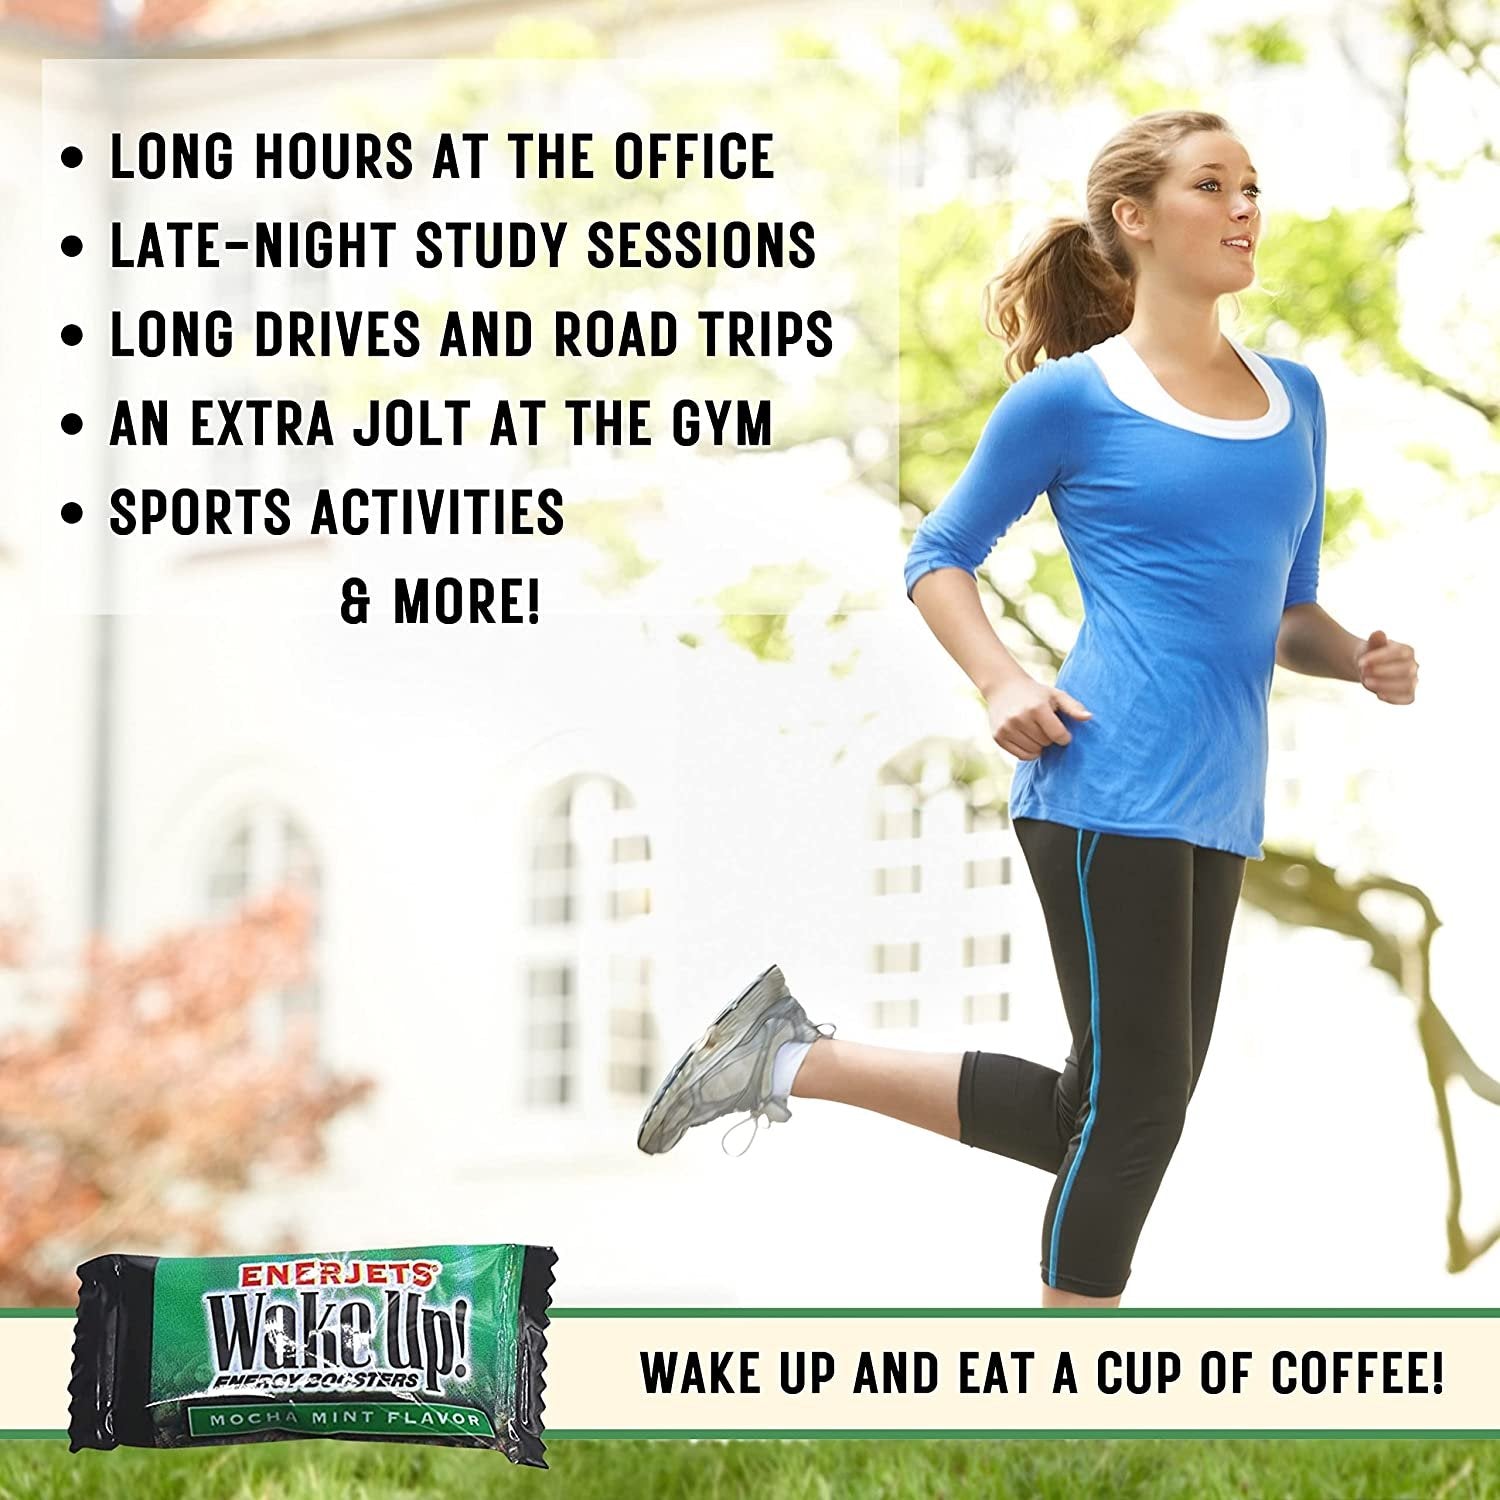 Worldwide Nutrition Enerjets Wake Up Energy Booster Caffeinated Drops - Instant Coffee Energy Supplements - Mocha Mint Flavor - Pack of 3, 12 Drops Per Package with Worldwide Multi Purpose Key Chain